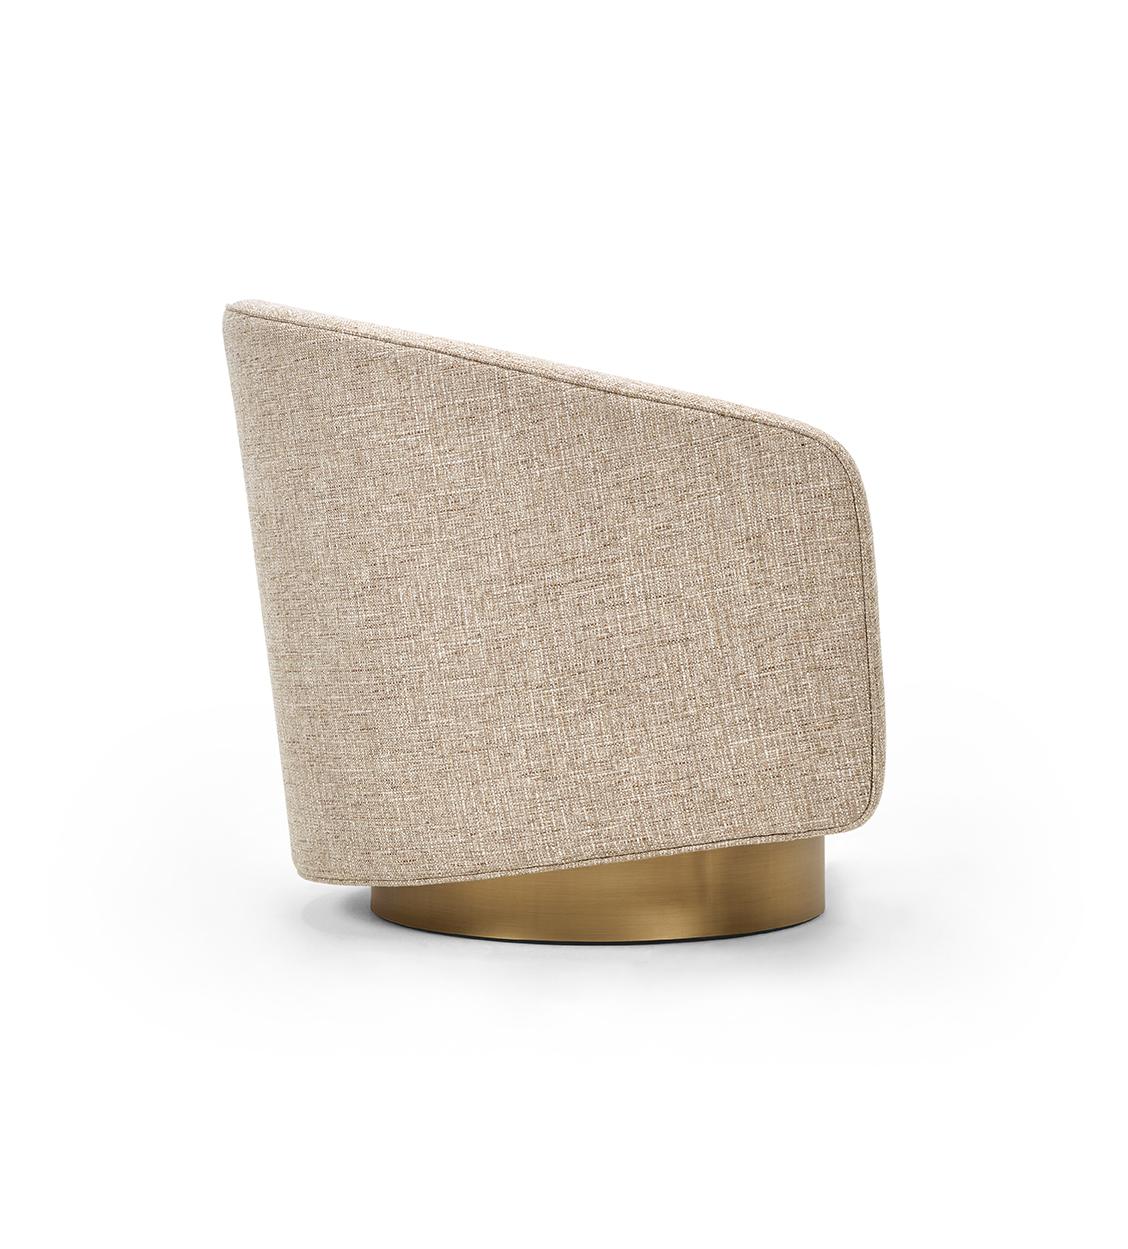 Modern BOEMIA Swivel Armchair in Textured Beige and brass colored base For Sale